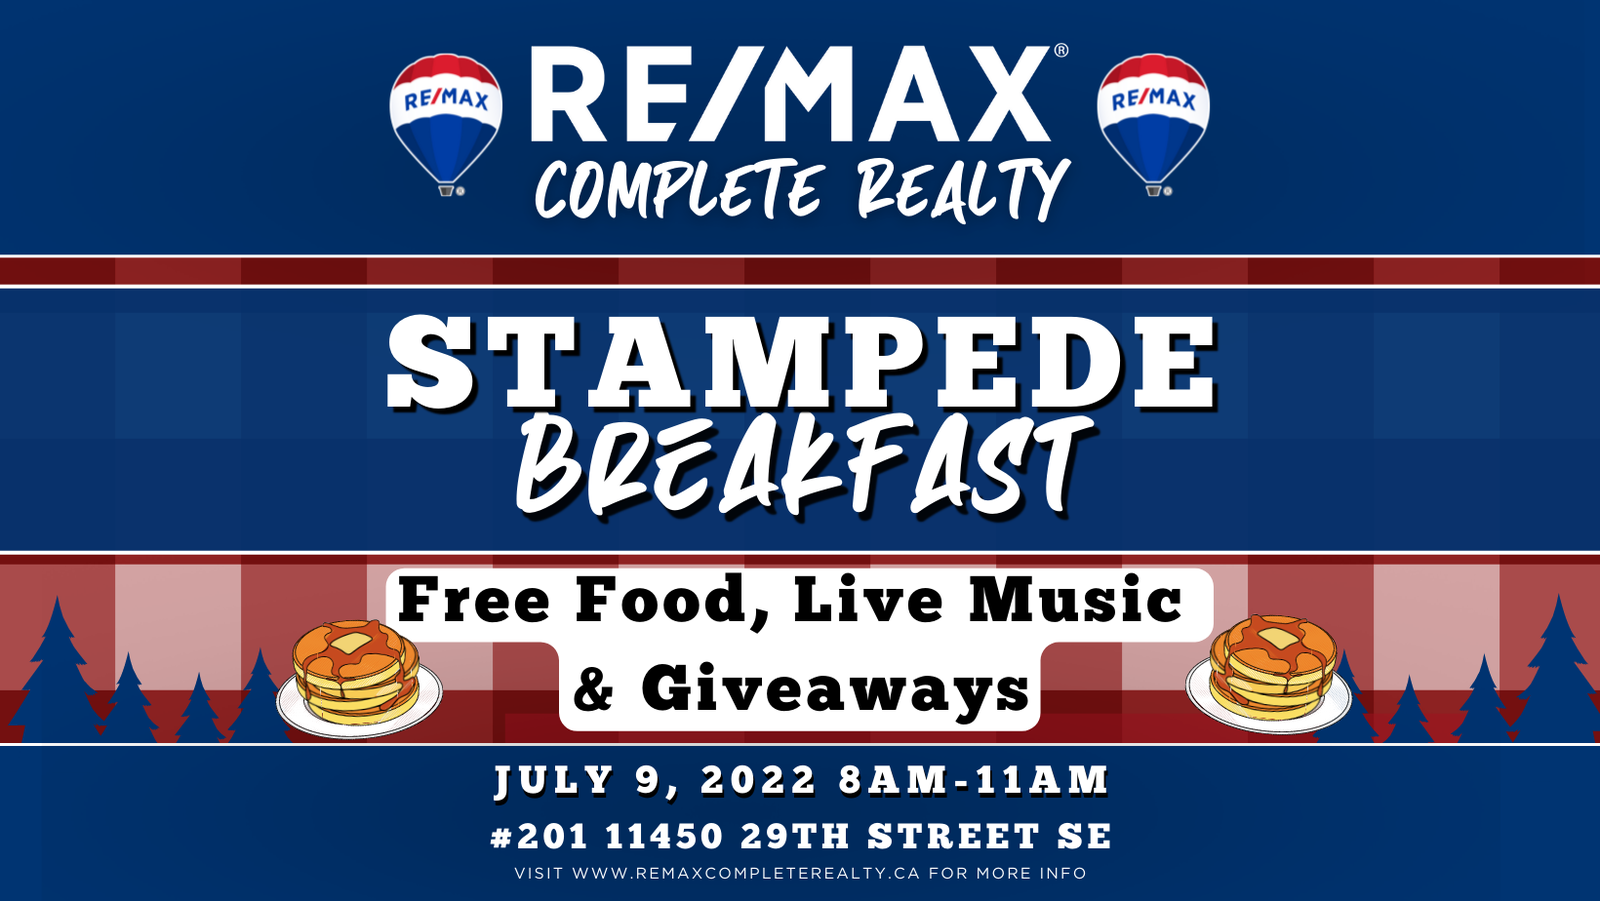 RE/MAX Complete Realty hosts 2nd Annual Calgary Stampede FREE Pancake Breakfast. Live music from Alberta country music start, Brandon Lorenzo. Takes place on July 9, 2022 from 8:00 AM to 11:00 AM at #201, 11450 29 Street SE in Calgary, Alberta.